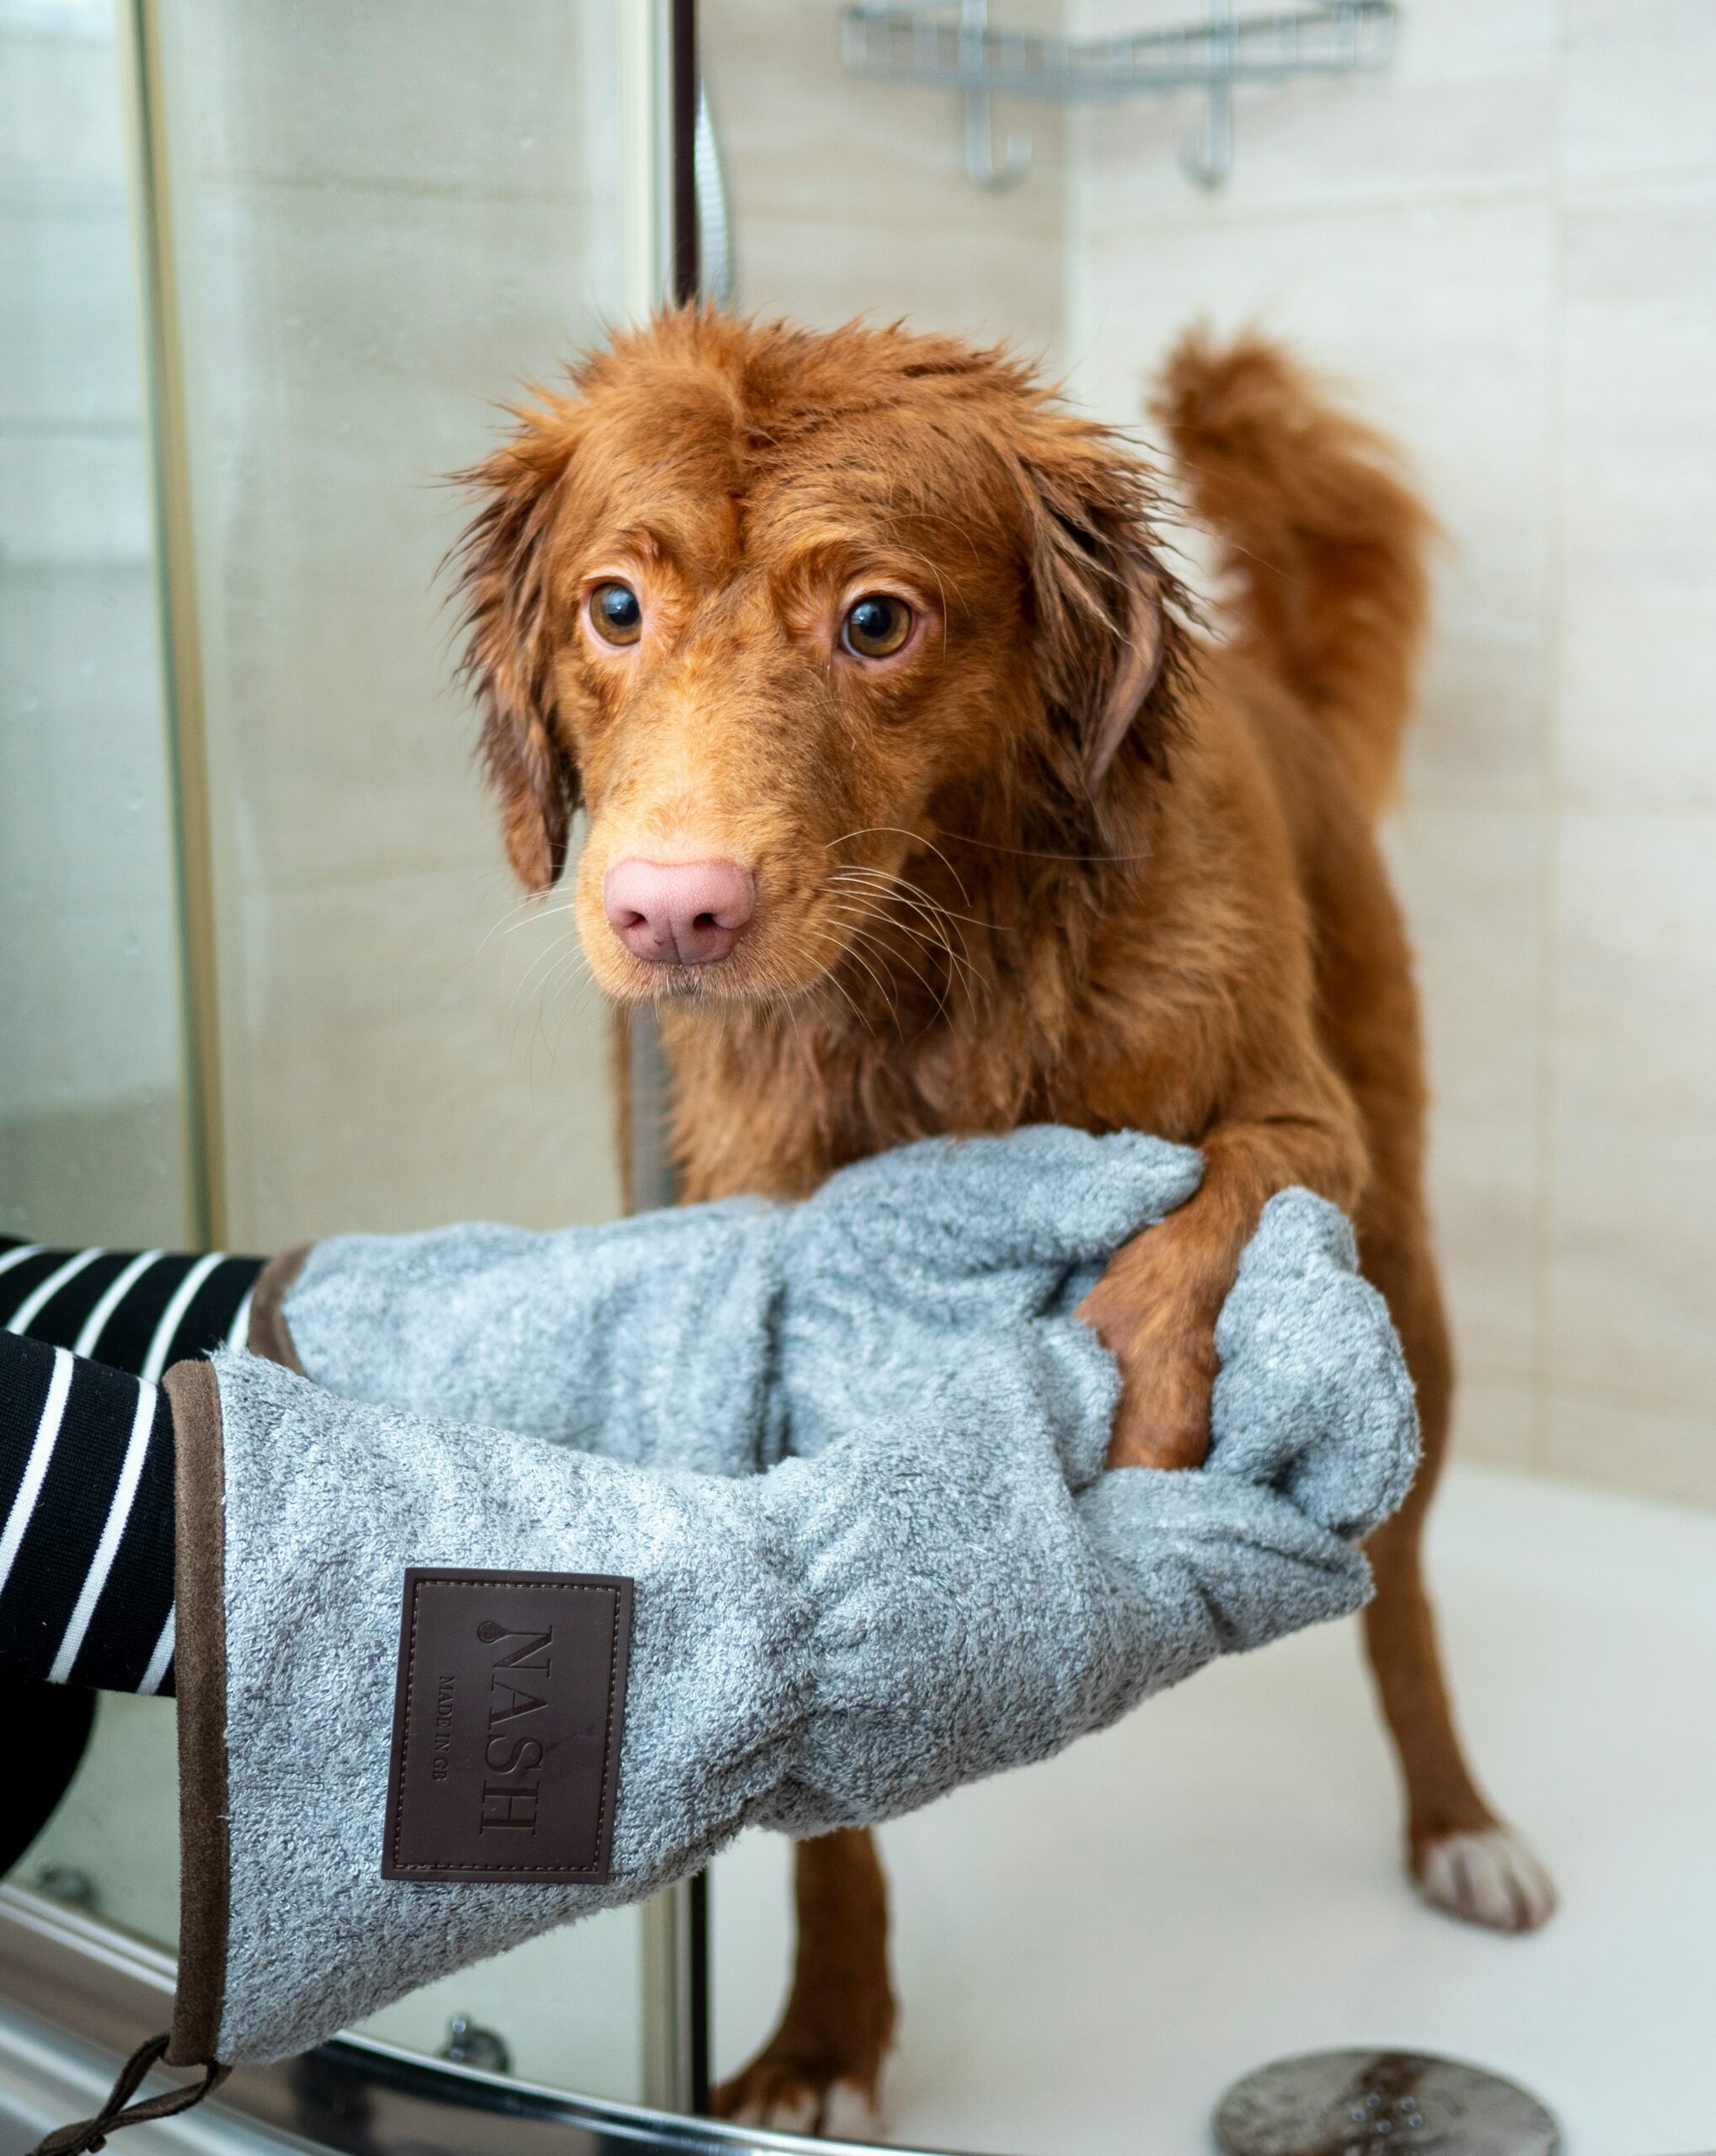 How often should you groom a dog?